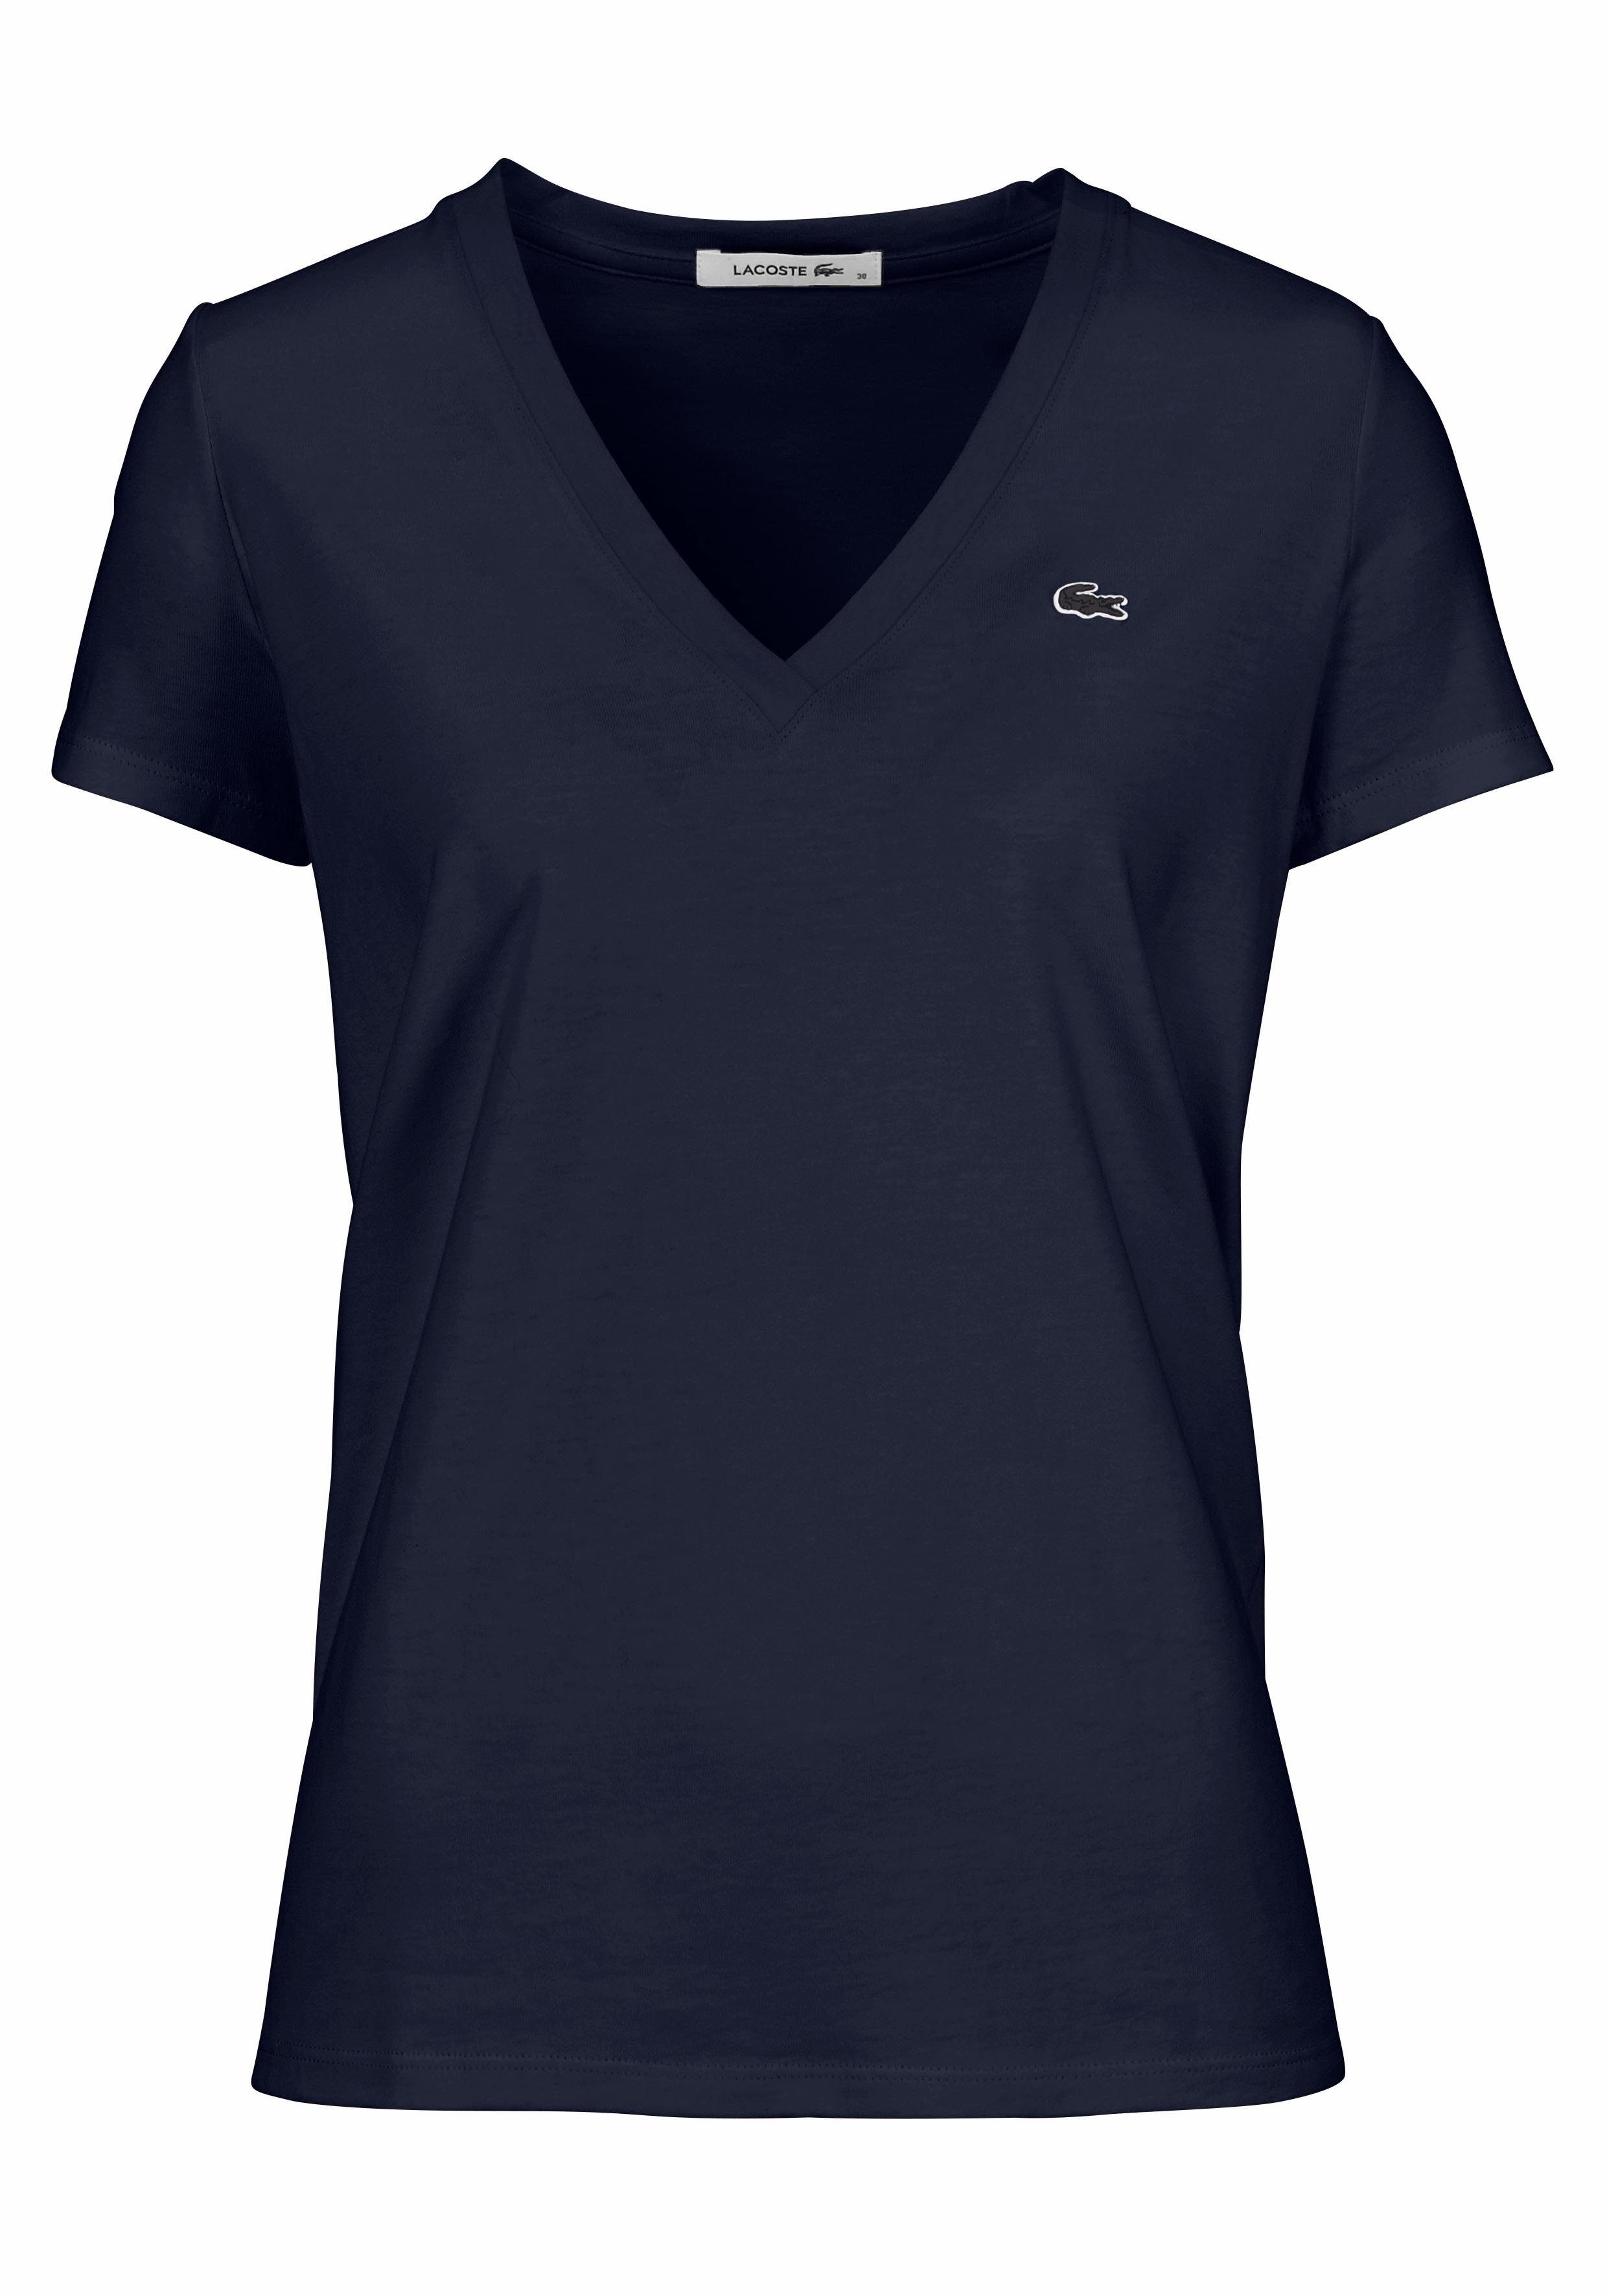 Otto t shirts online shopping – Ladies wear catalogues, girls catalogue |  find trending women's fashion